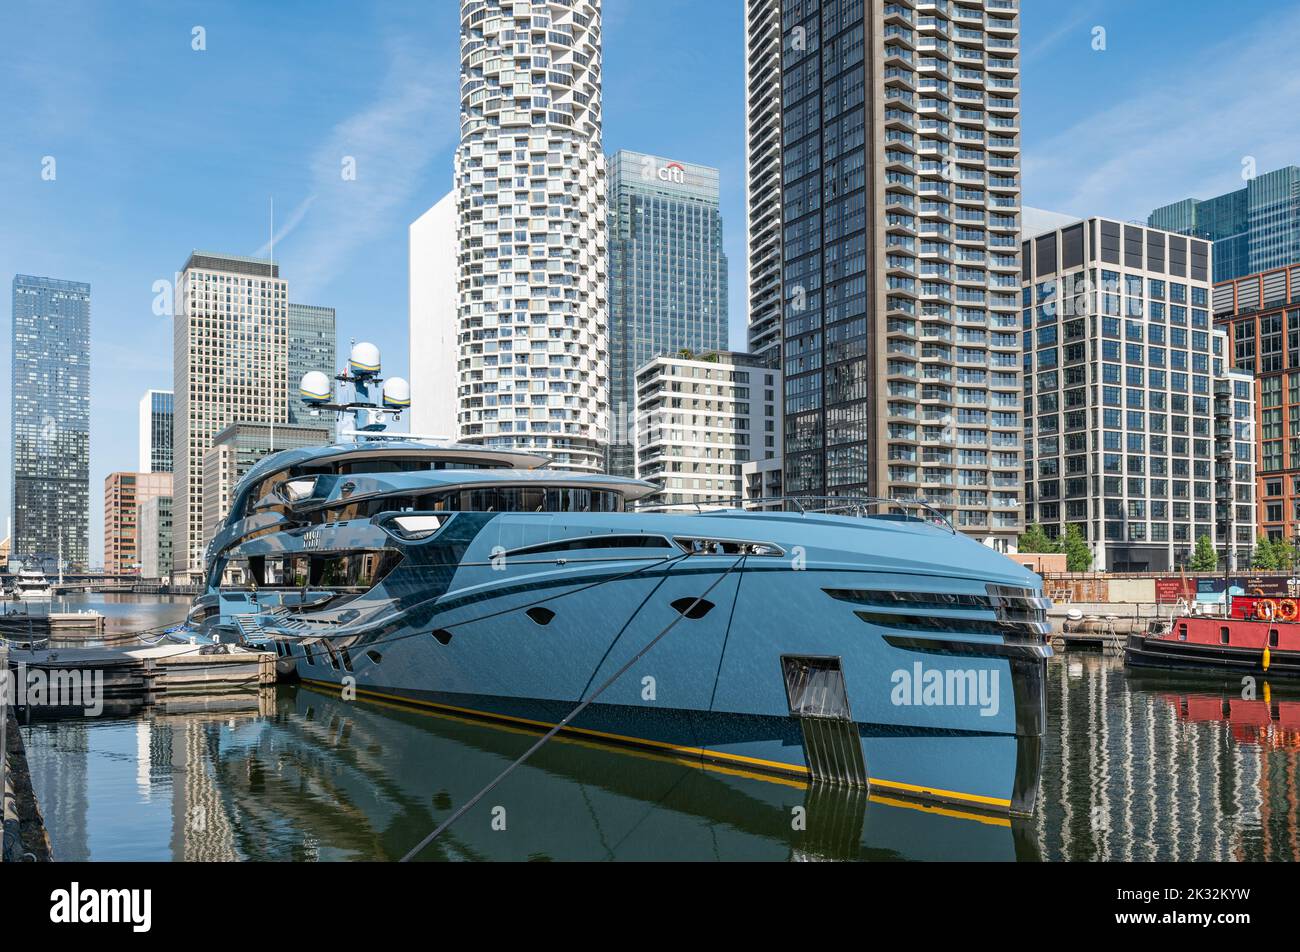 Superyacht Phi moored in South Dock, Canary Wharf. Phi has been impounded by the National Crime Agency as part of sanctions against Russian oligarchs. Stock Photo